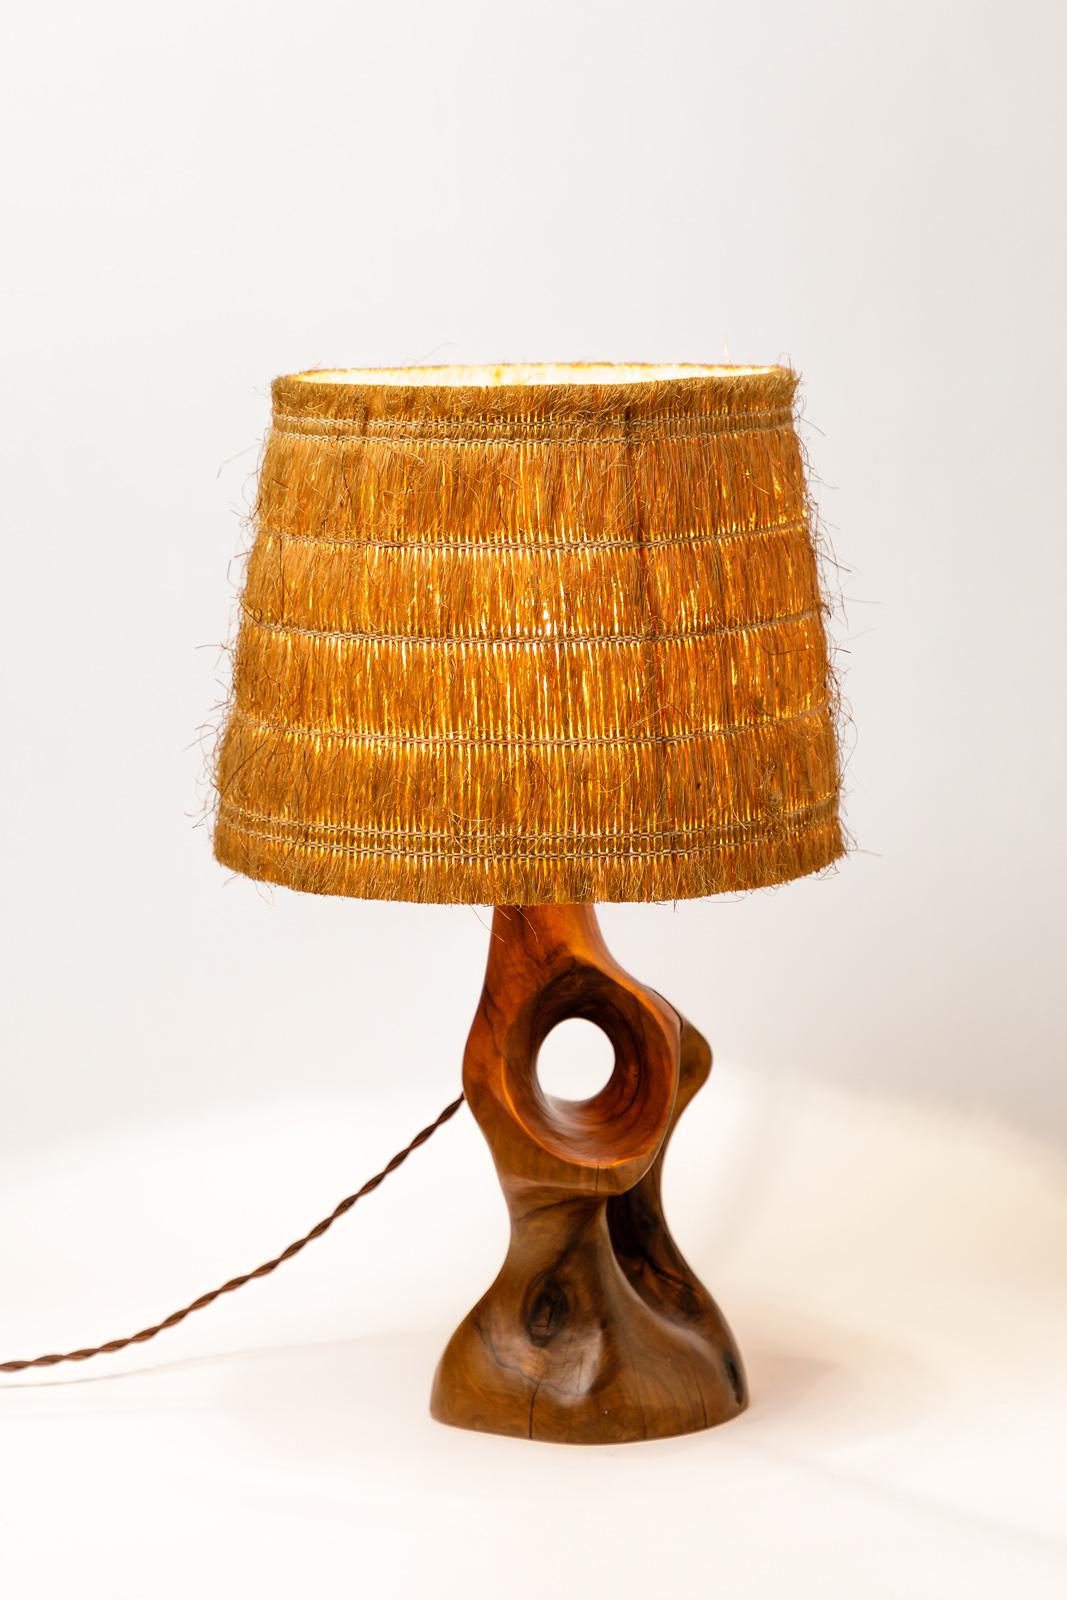 Brown Olive Wood Table Lampe circa 1950 French Riviera Decoration 2